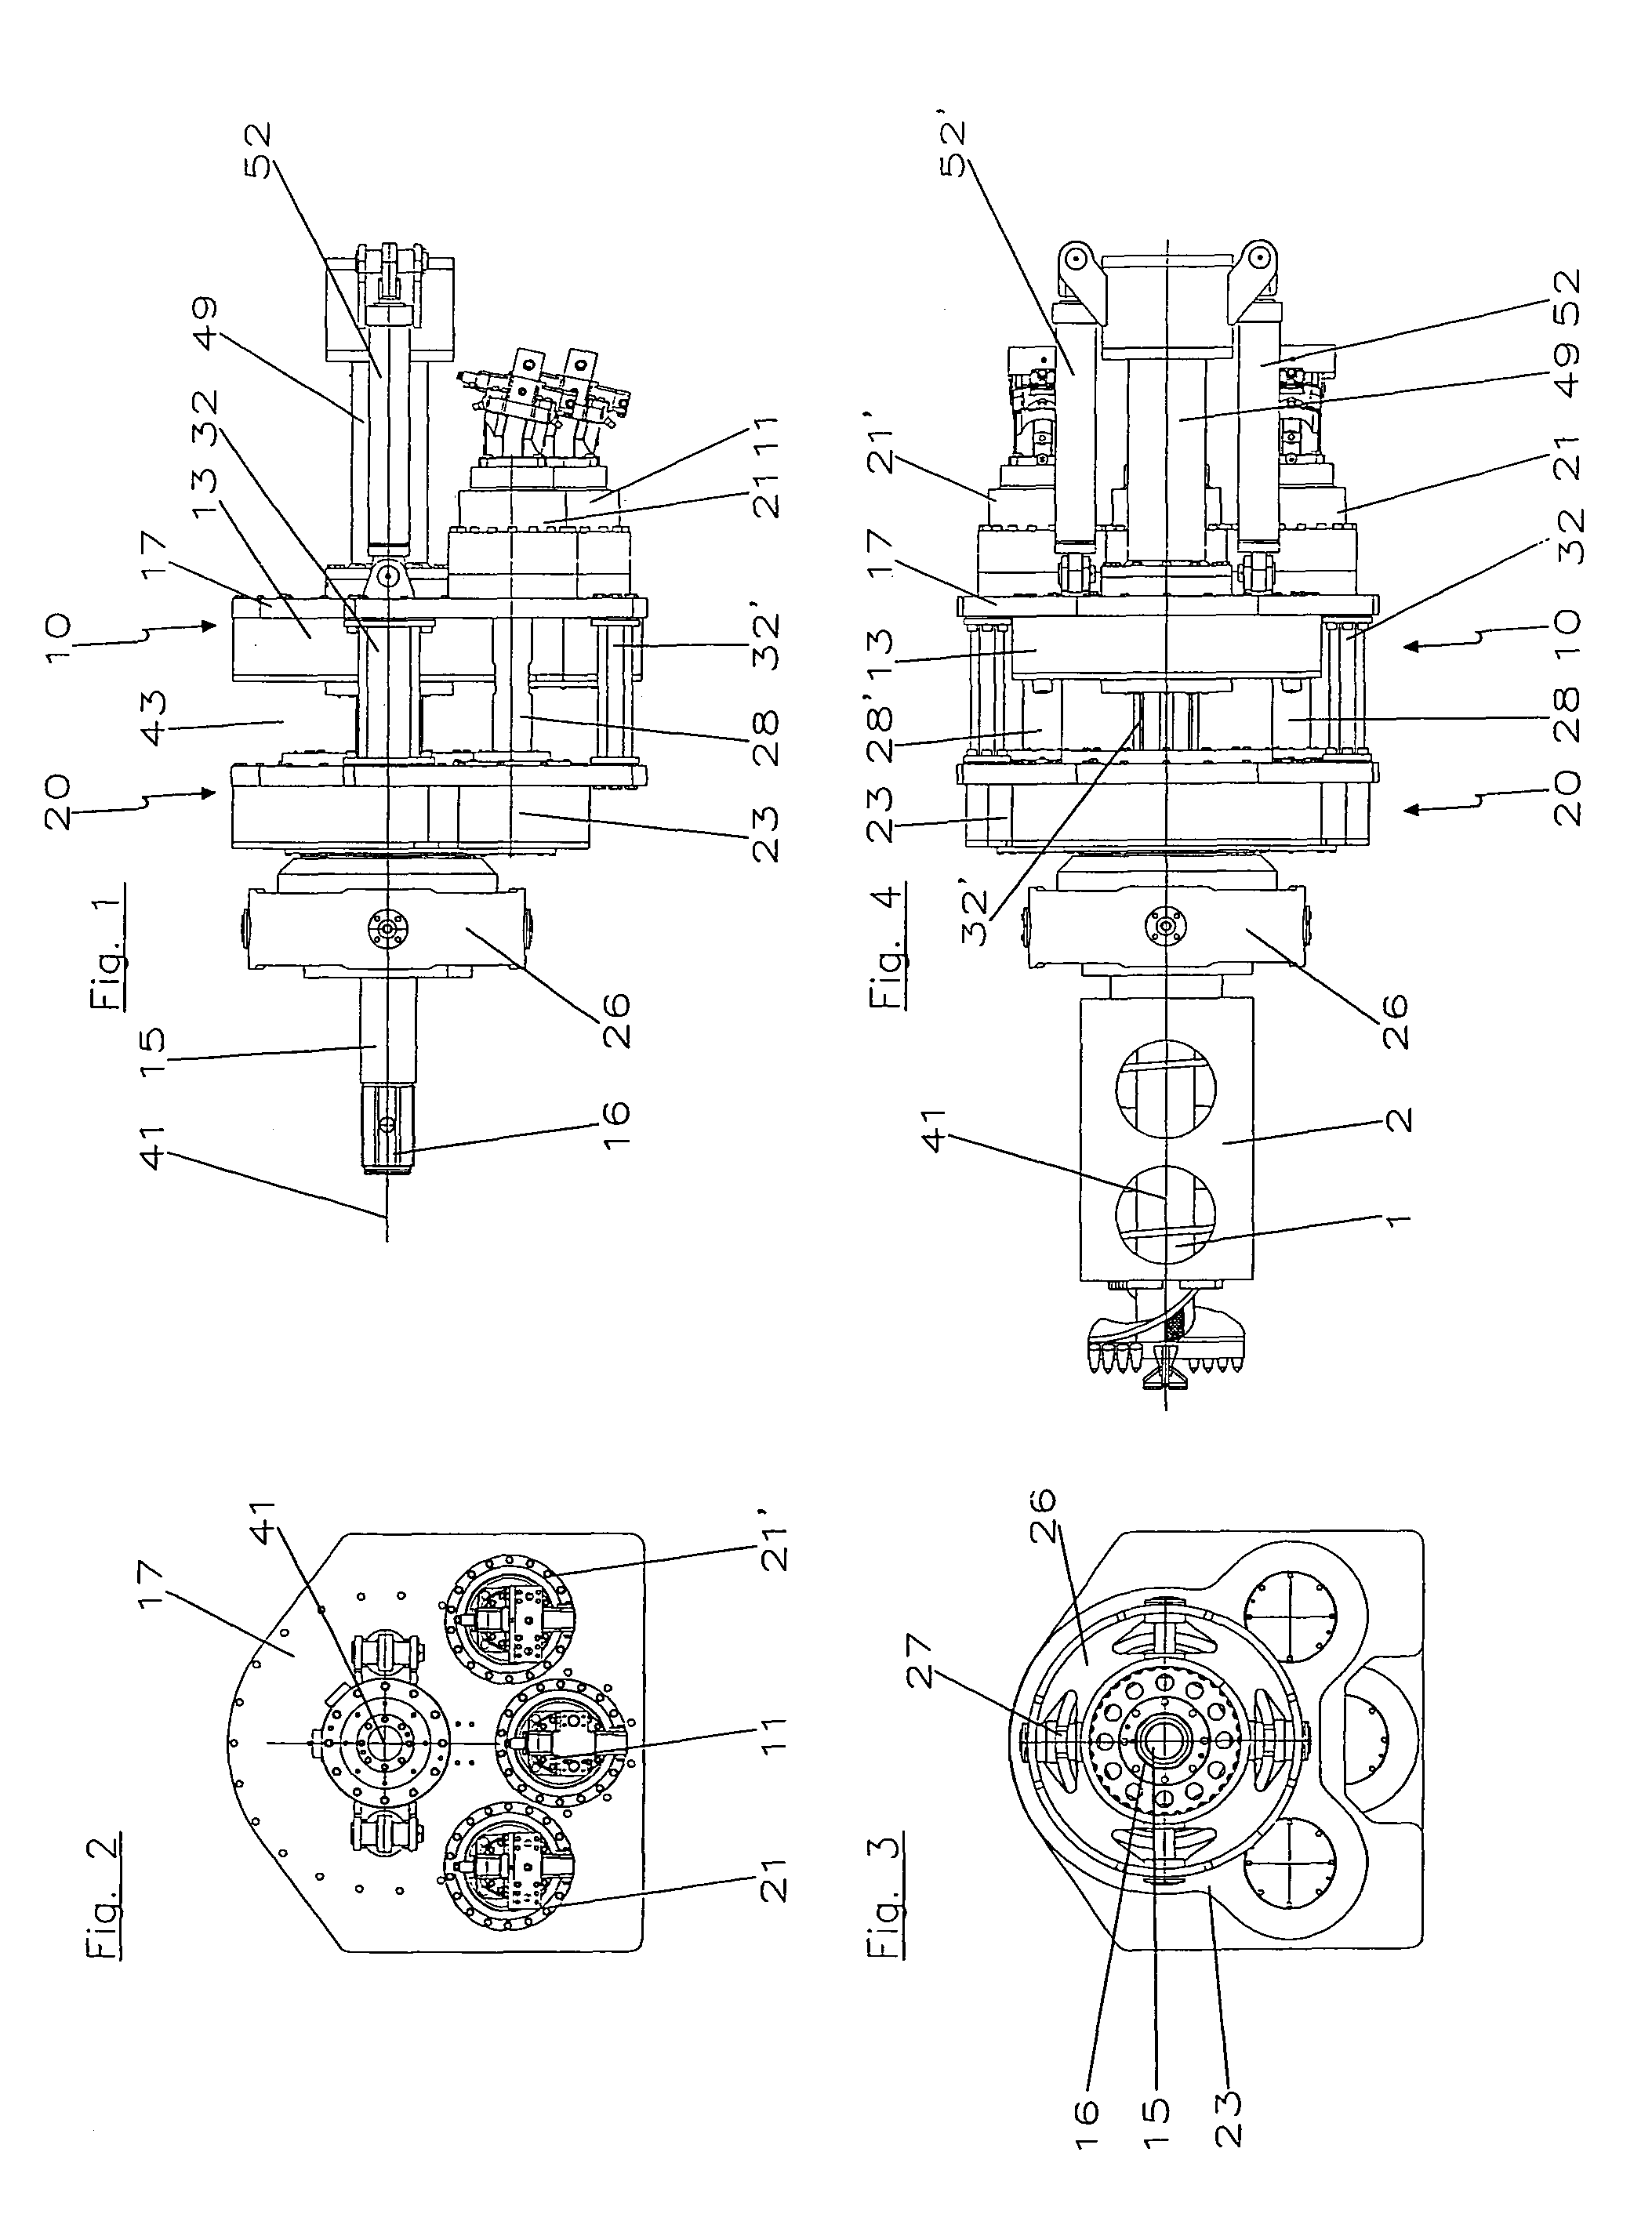 Rotary drive assembly for a drill rod